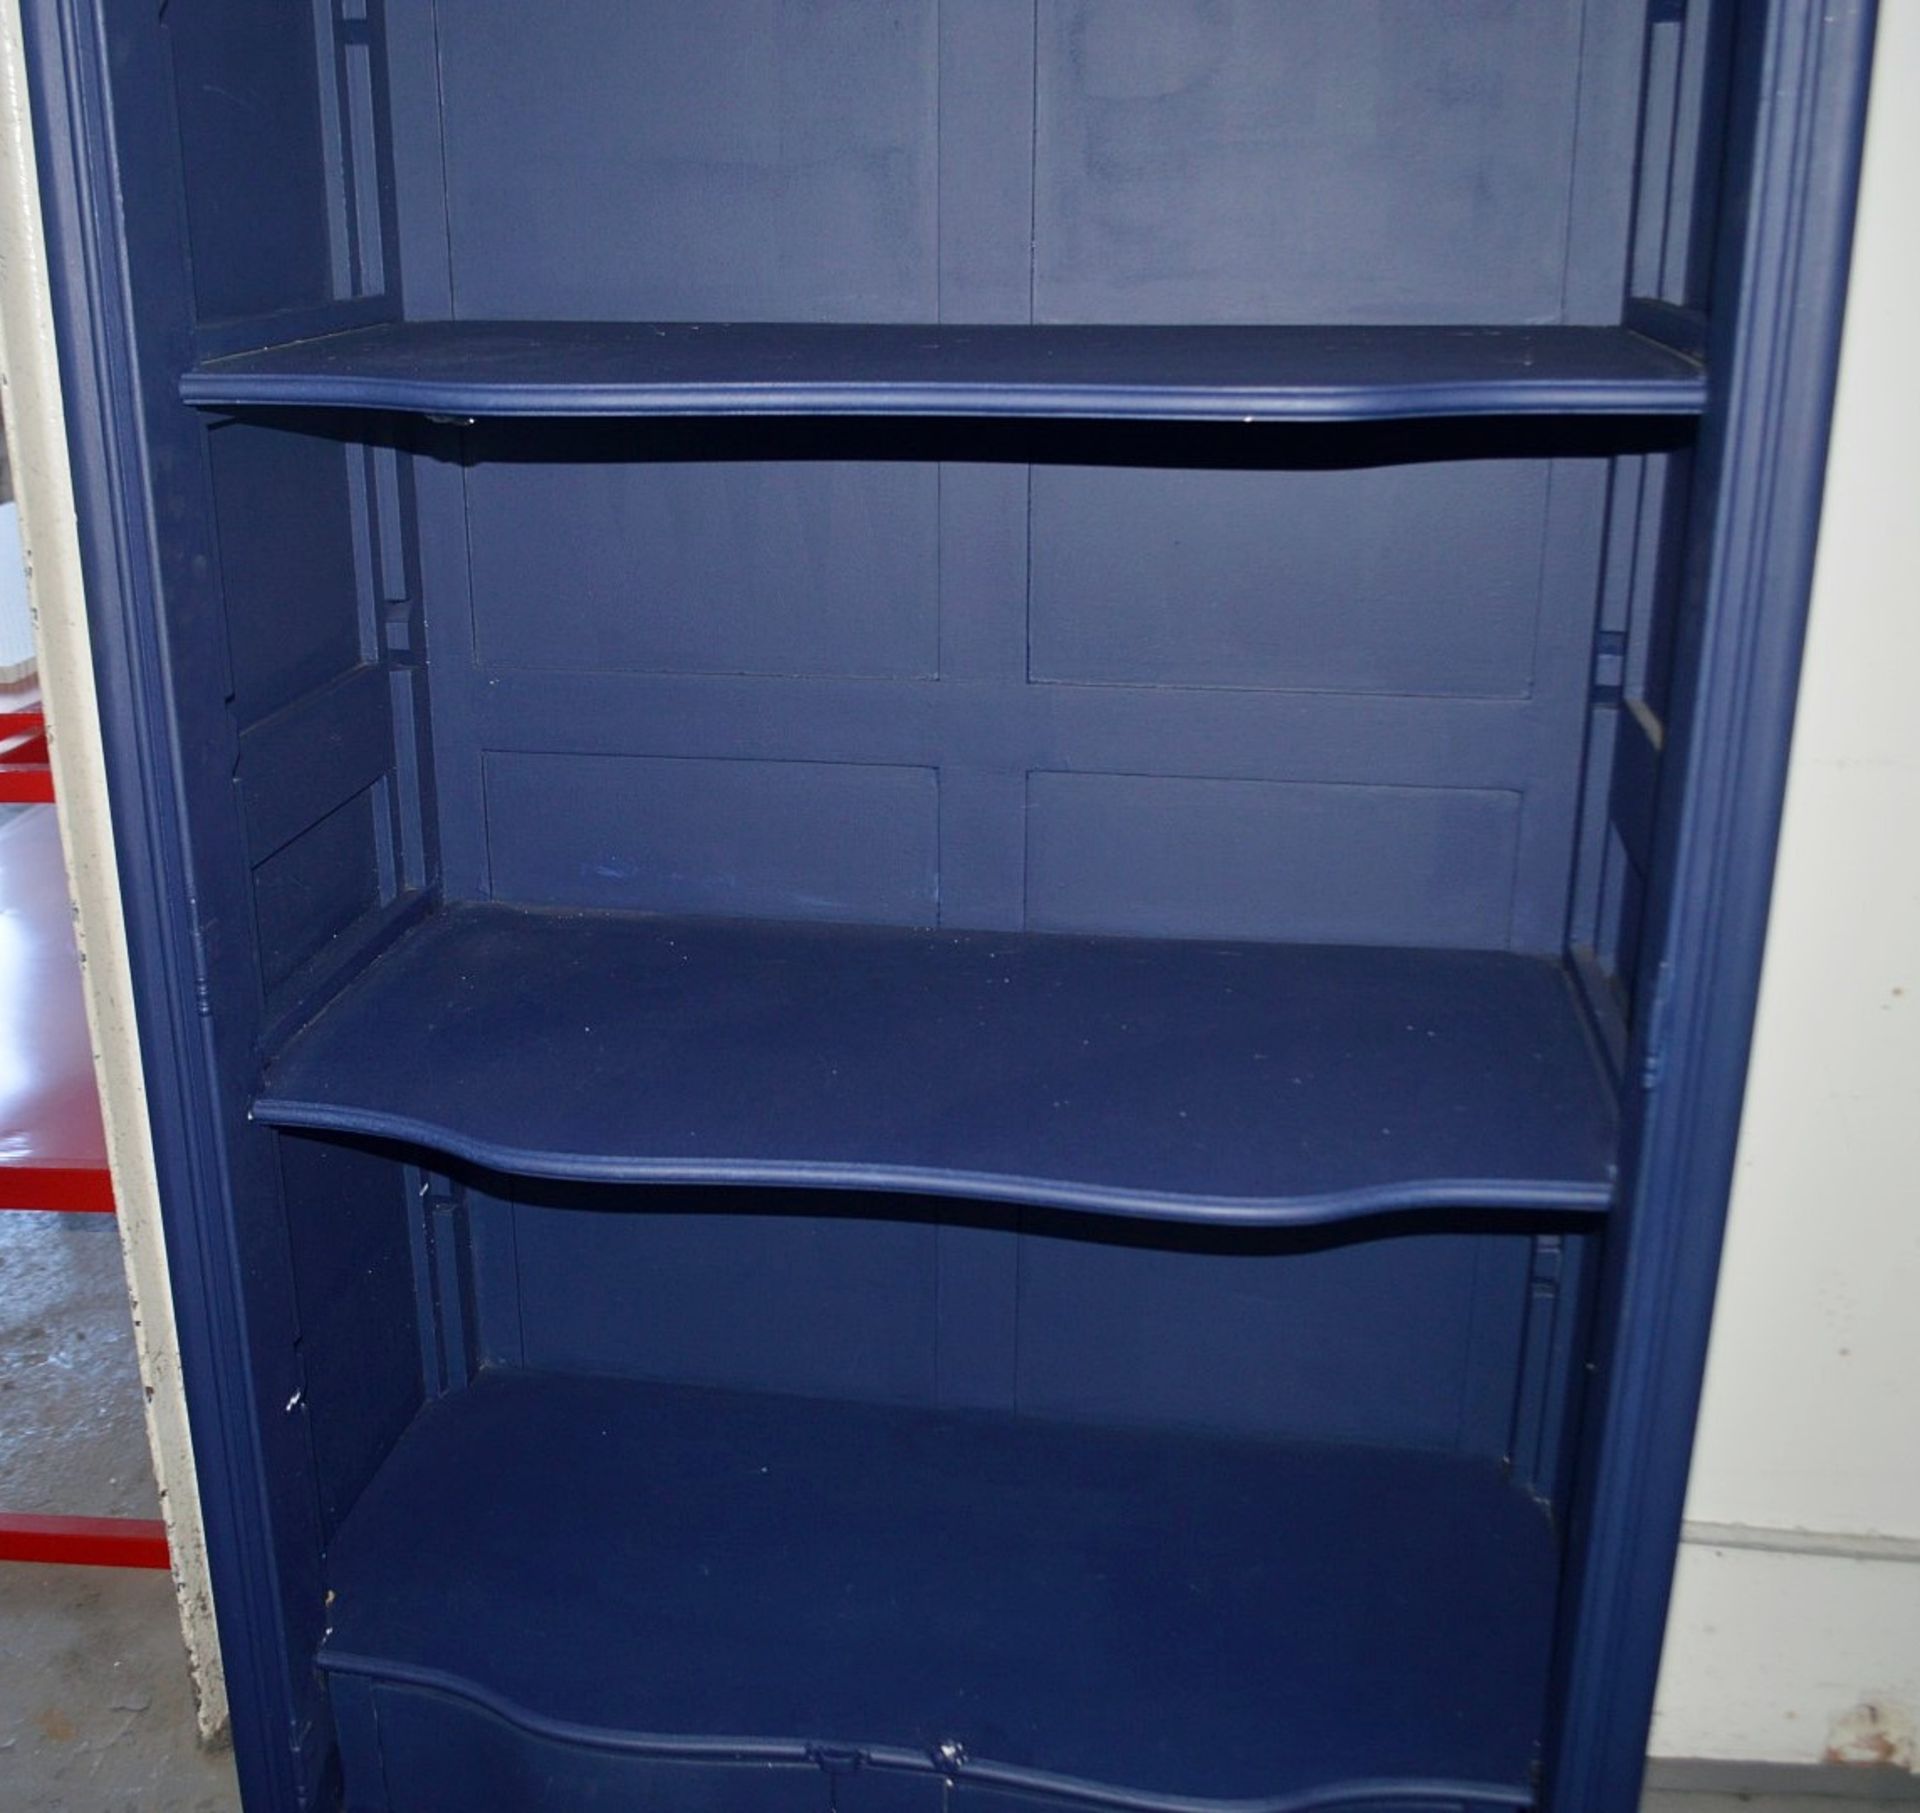 1 x Armoire 2.2-Metres Tall Display Cupboard With Bespoke Deep Blue Paintwork - Image 4 of 6